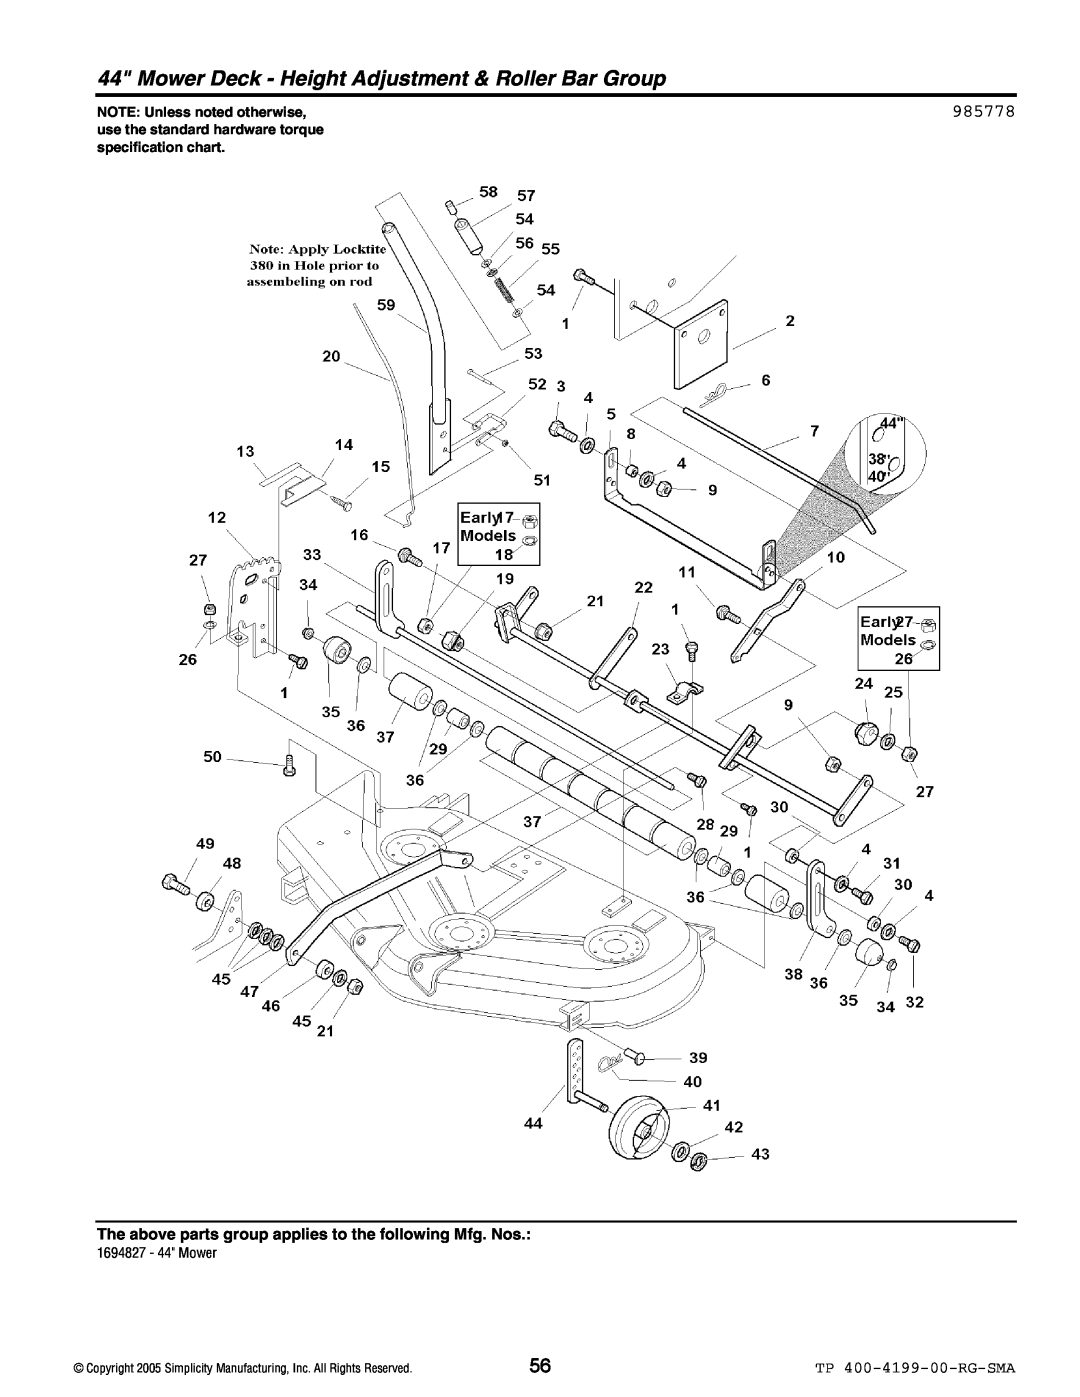 Snapper 2500 Series manual 985778, TP 400-4199-00-RG-SMA, NOTE Unless noted otherwise, 1694827 - 44 Mower 